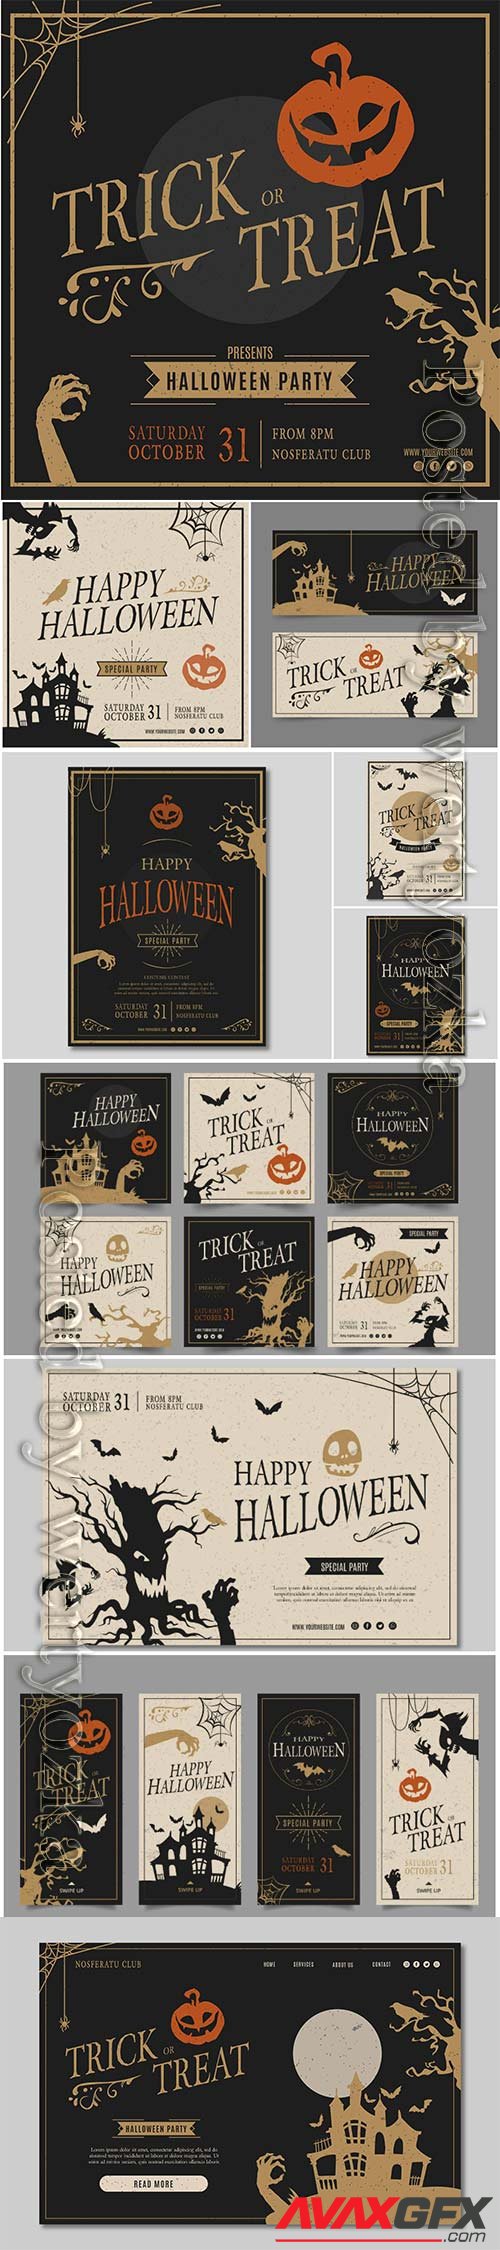 Halloween party squared flyer template